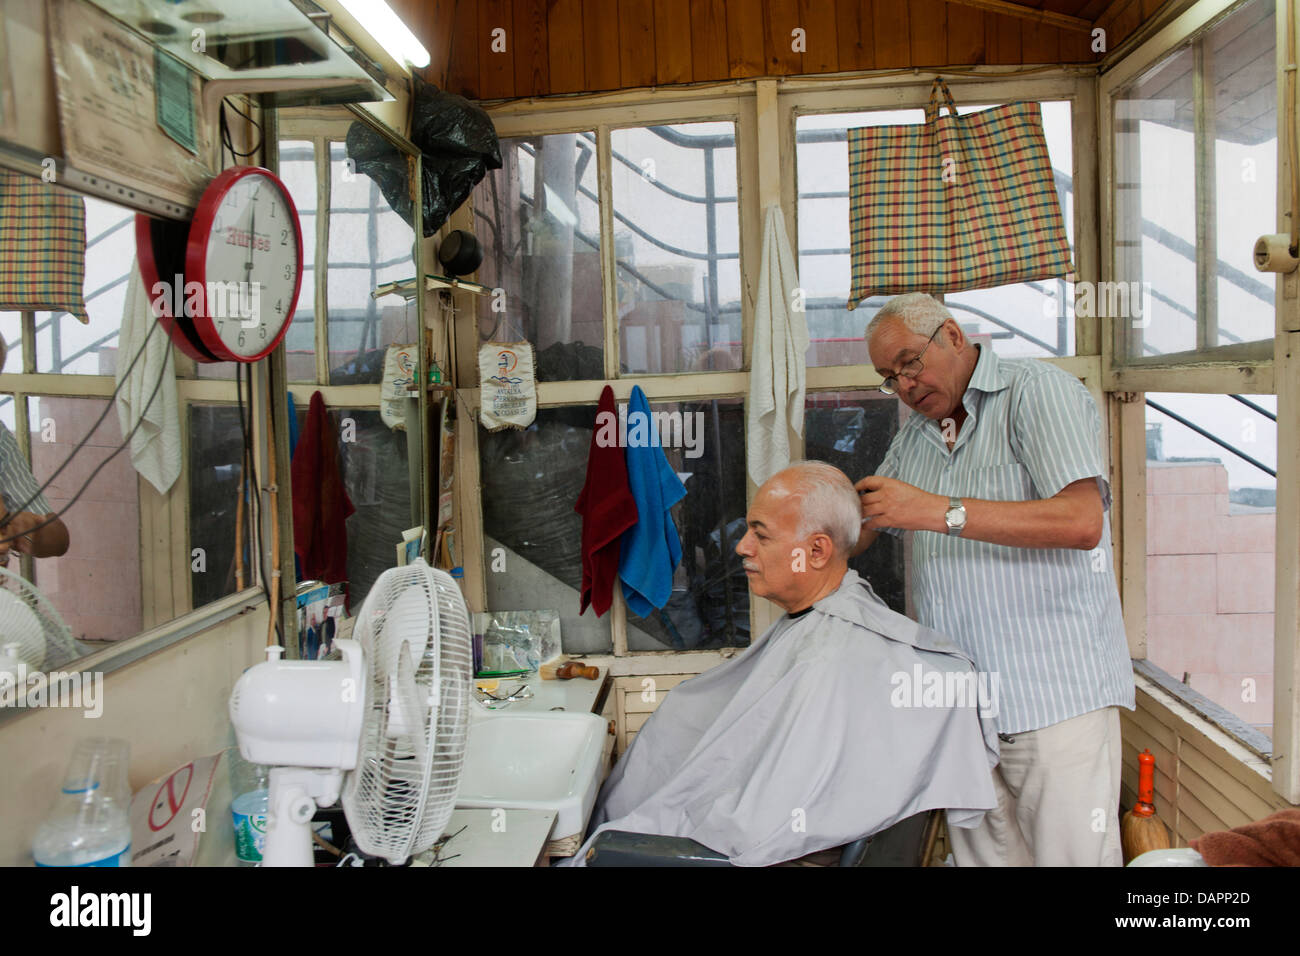 Friseur High Resolution Stock Photography and Images - Alamy